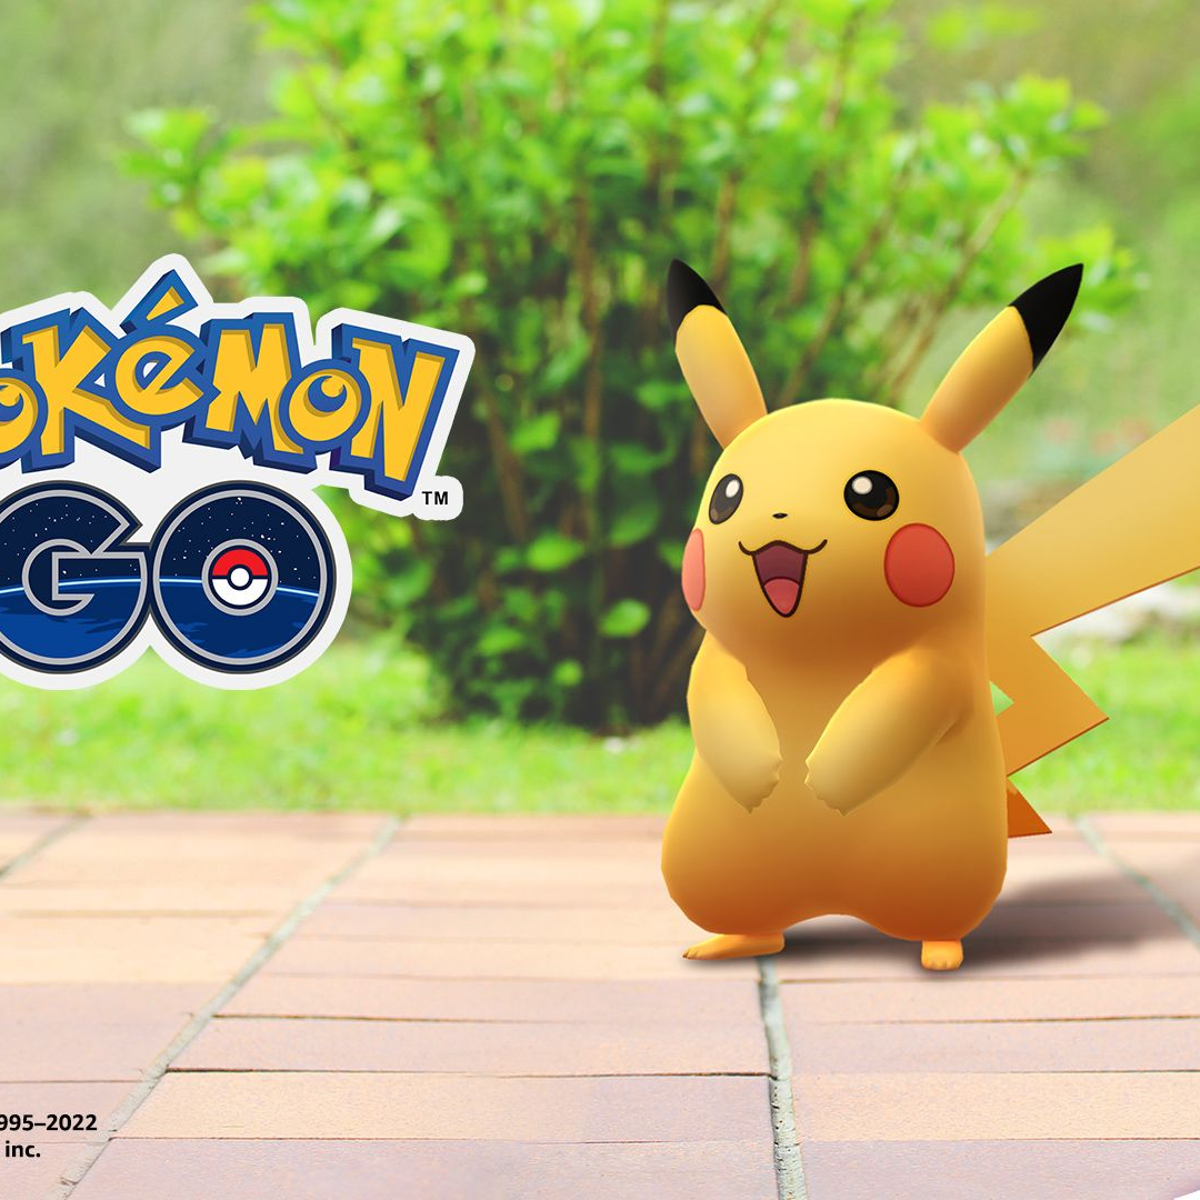 The  Prime Gaming Pokémon Go collaboration is full of goodies